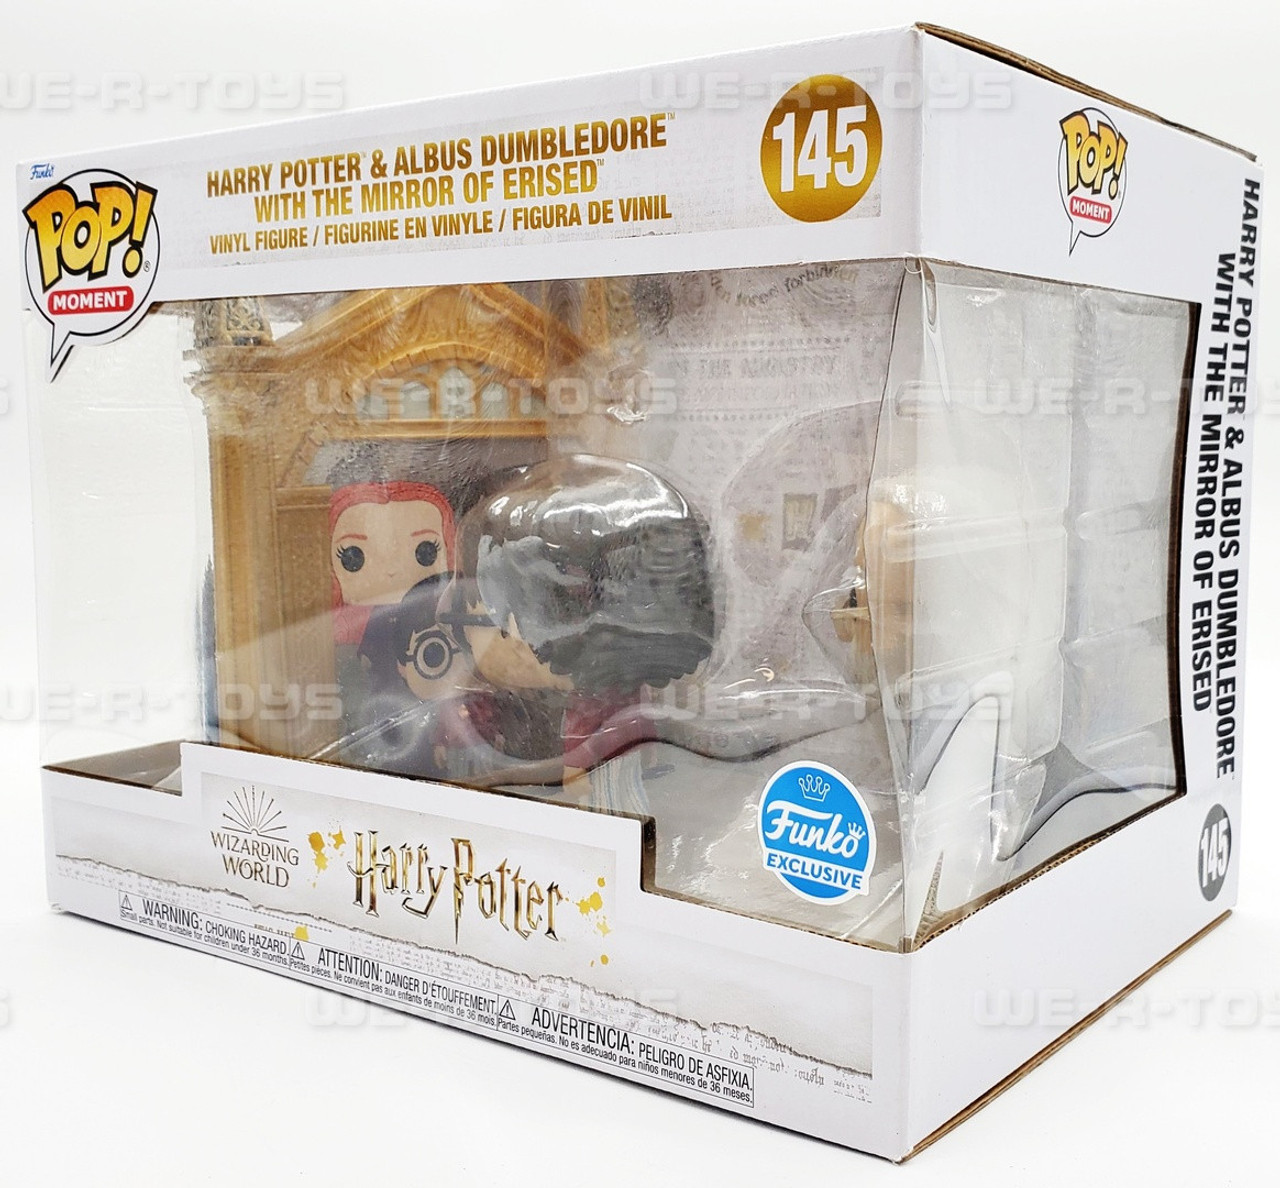 Awesome 10inch Dumbledore Pop from Pop in a Box! Use code: thepopnook